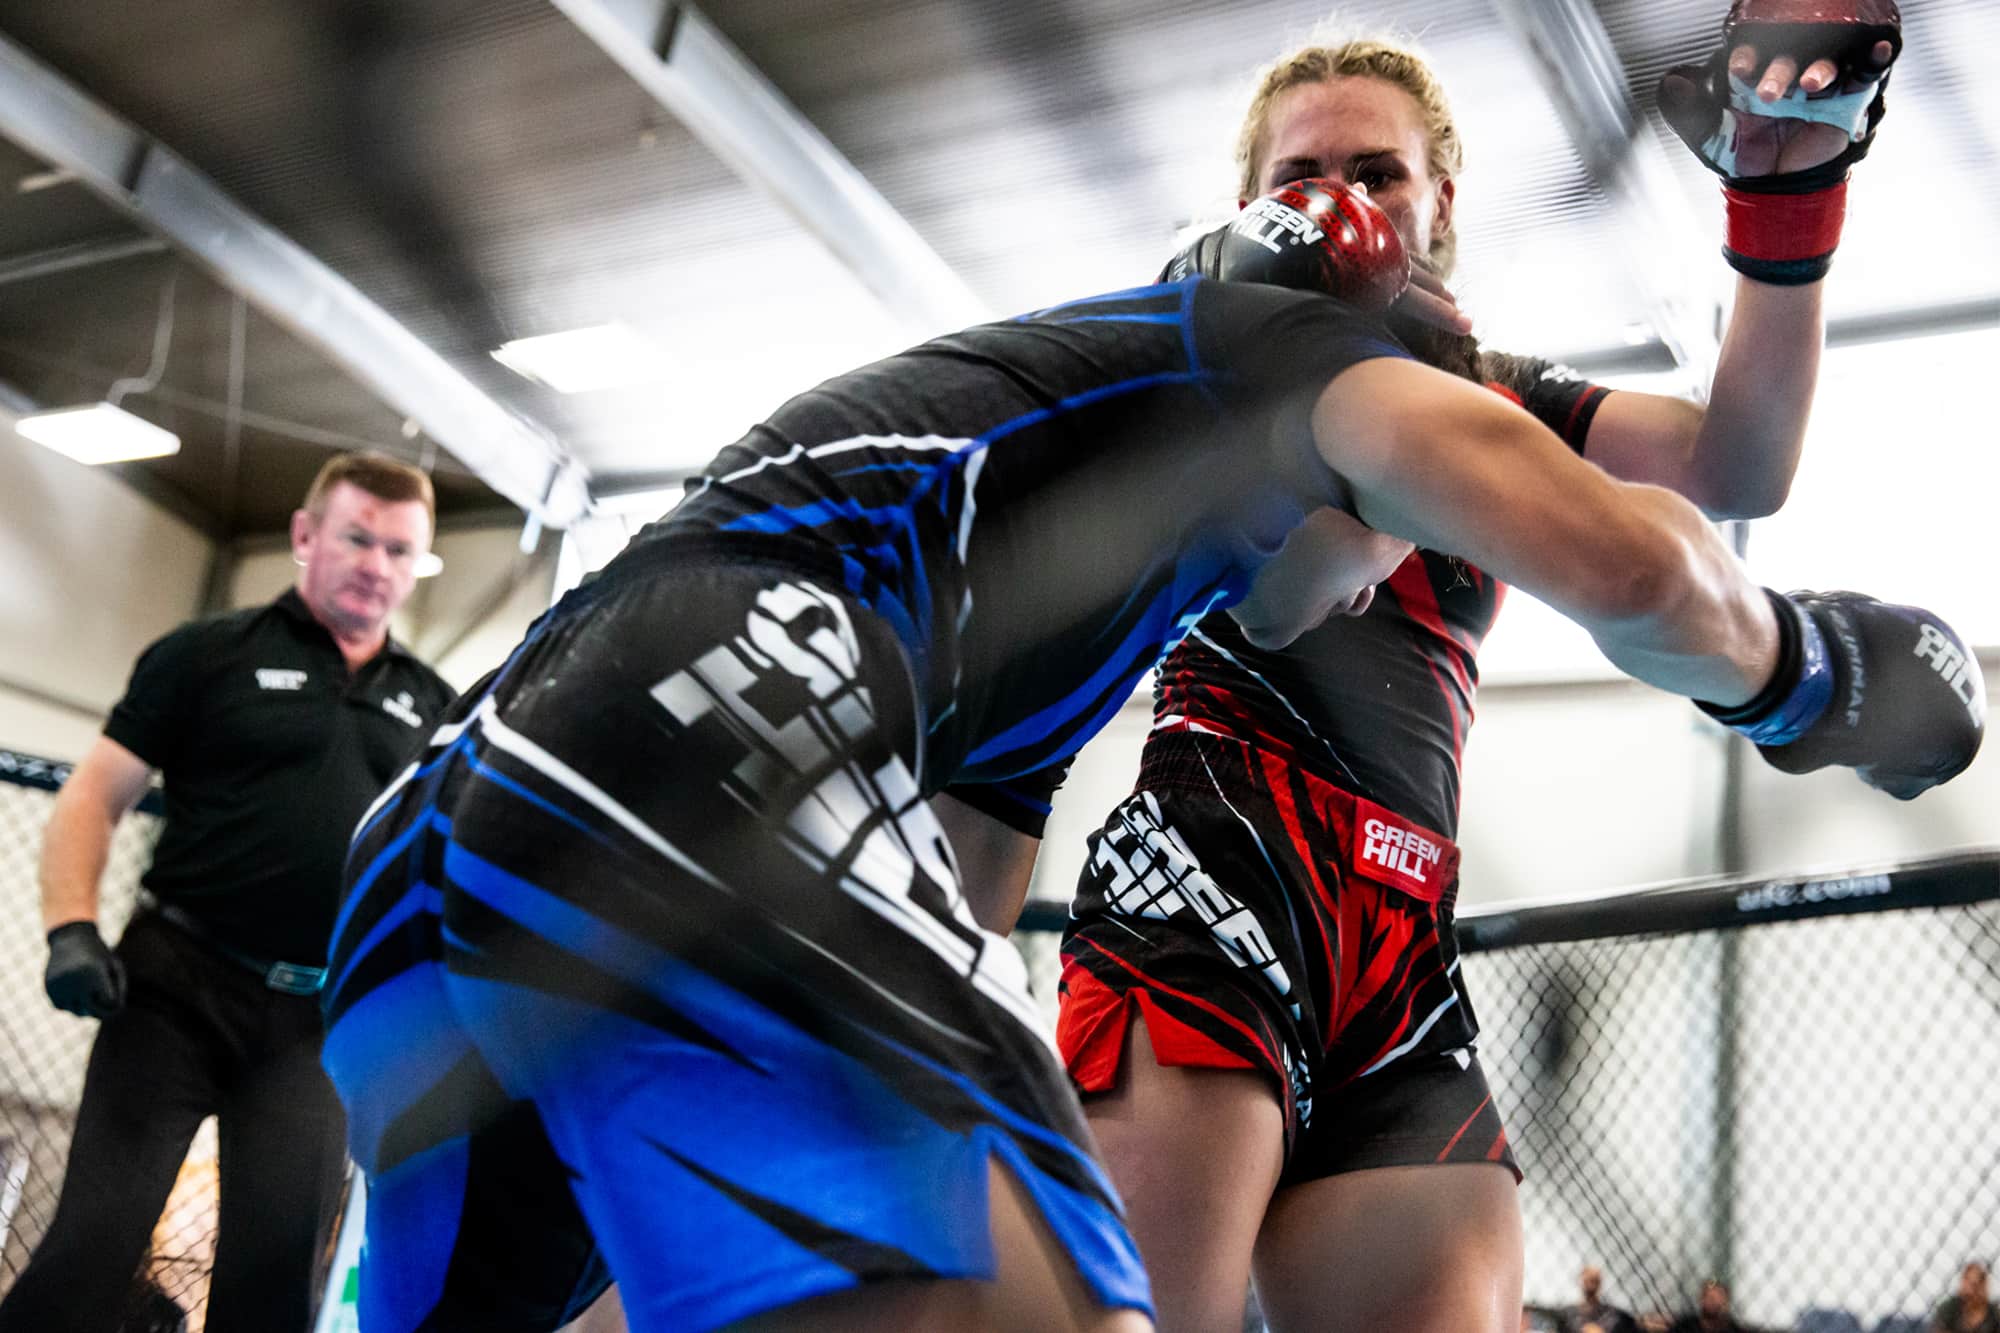 Anniversary of last IMMAF Event gives hope for the future